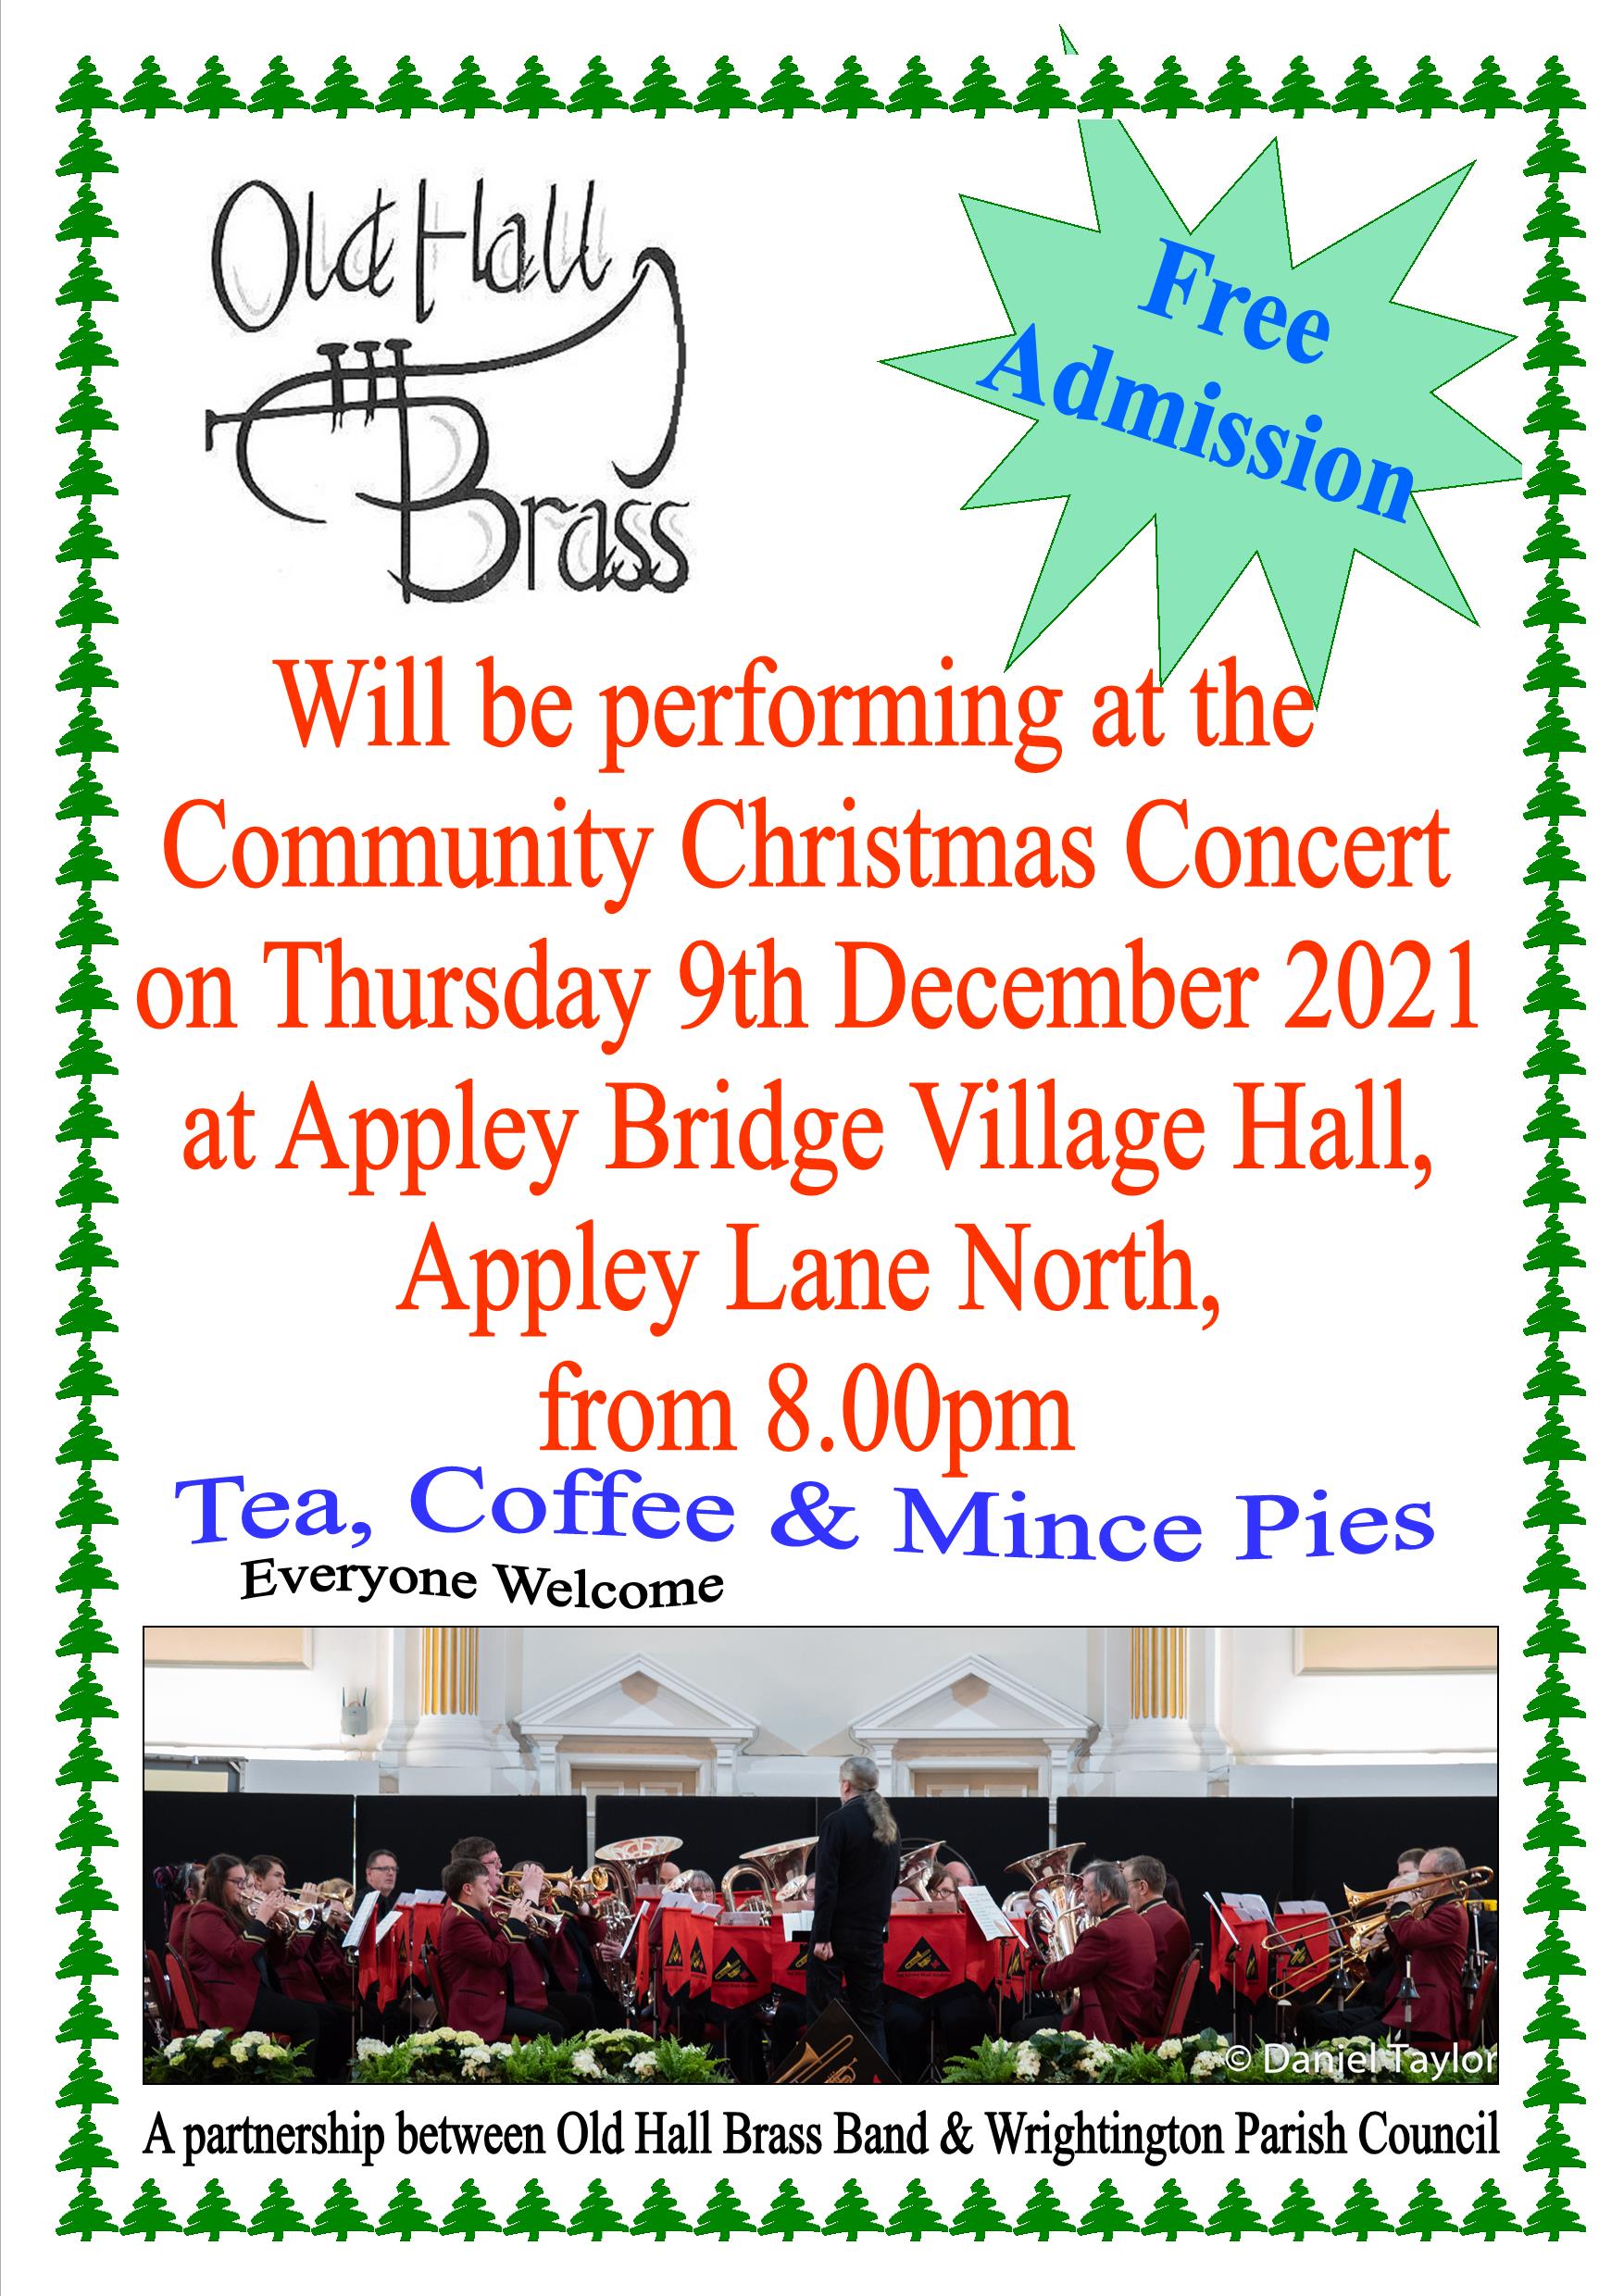 Old Hall Brass will be performing at the Community Christmas Concert on 9th Dec 2021 at Apply Bridge Village Hall from 8pm